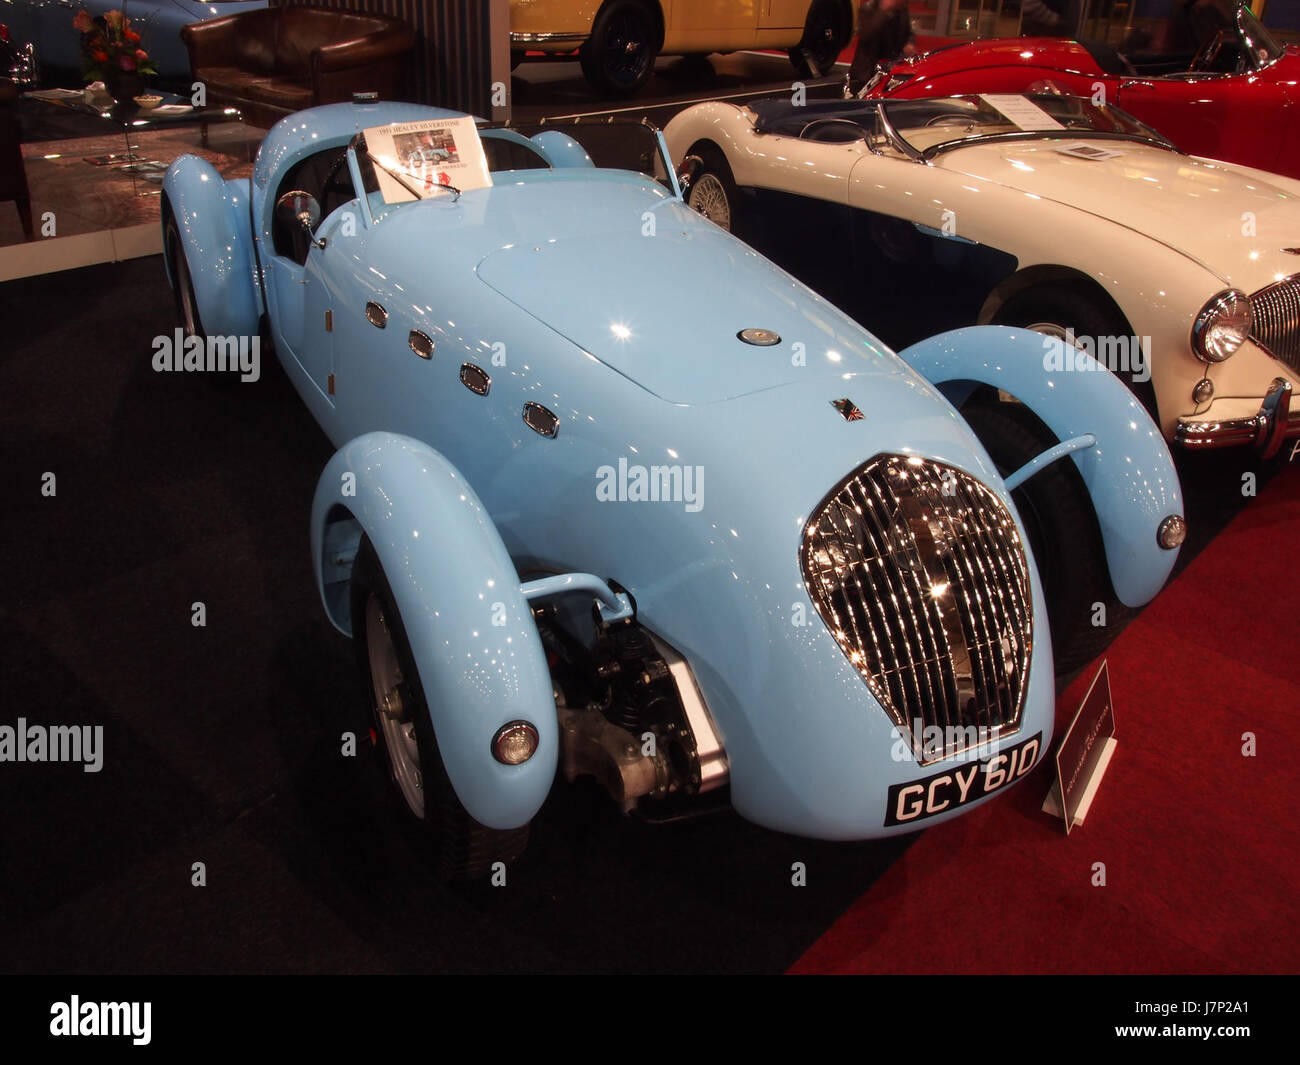 1951 Healey Silverstone pic1 Banque D'Images